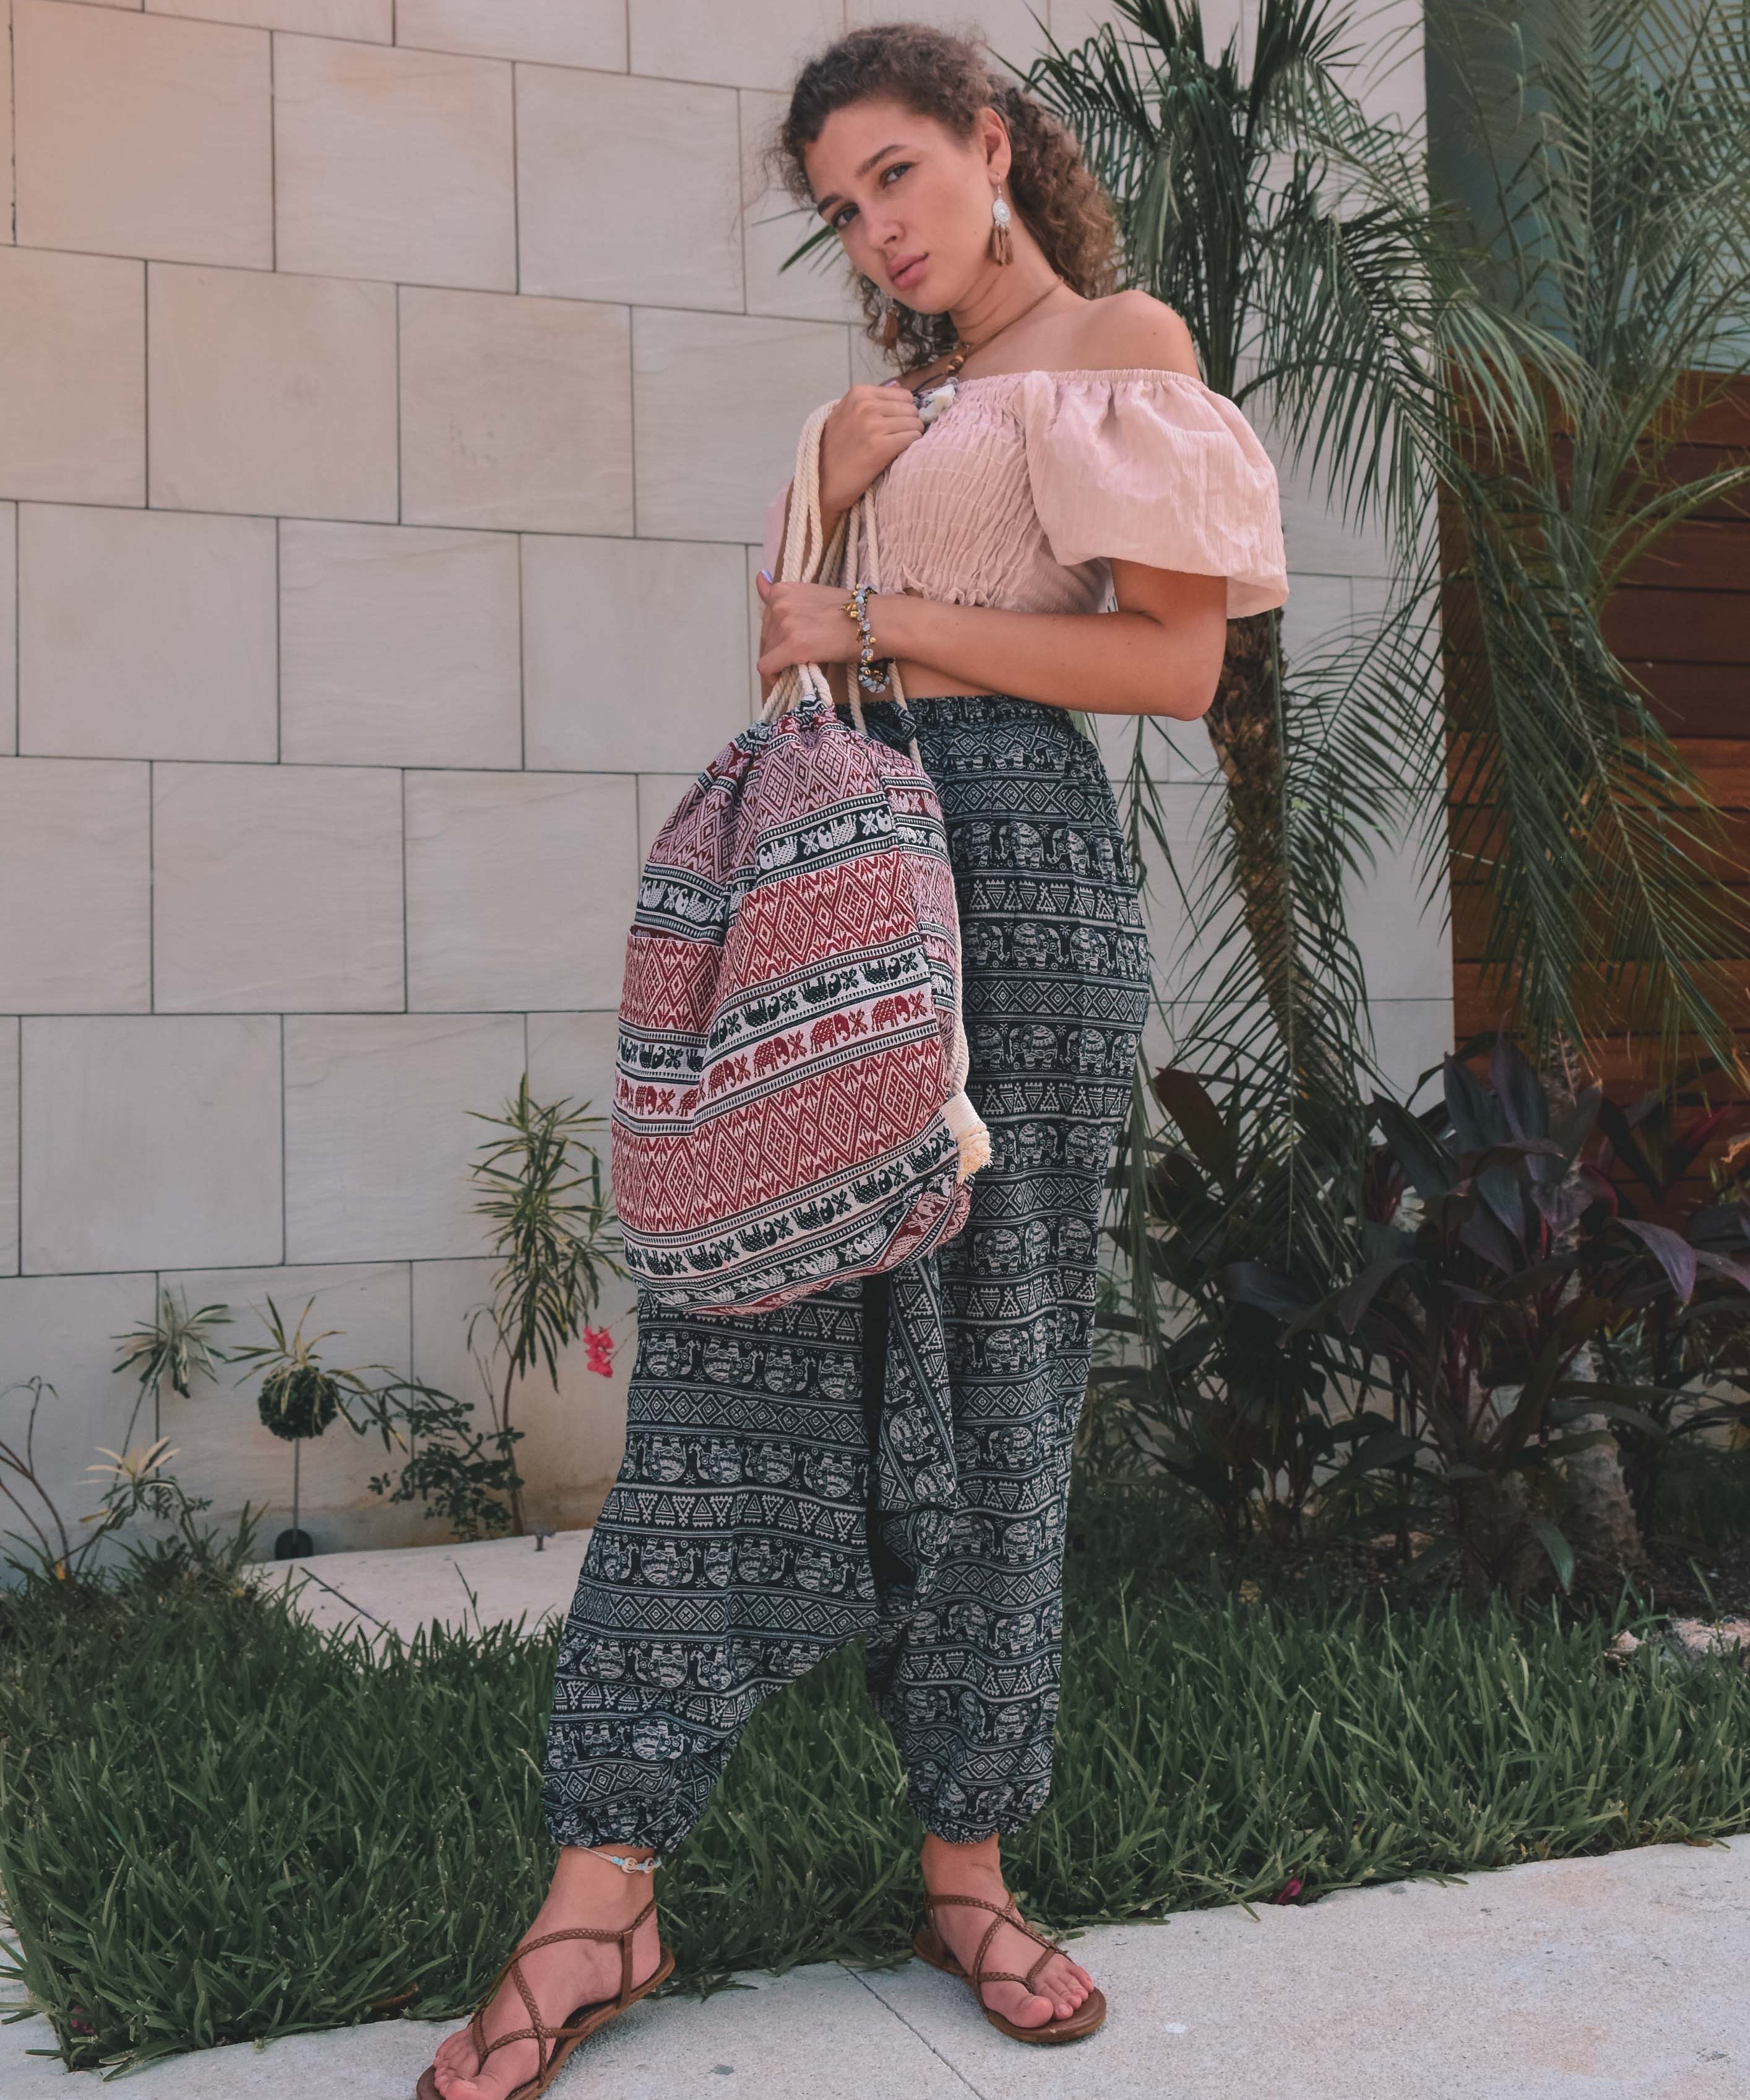 MALAWI DRAWSTRING BAG Elepanta Travel Bags - Buy Today Elephant Pants Jewelry And Bohemian Clothes Handmade In Thailand Help To Save The Elephants FairTrade And Vegan